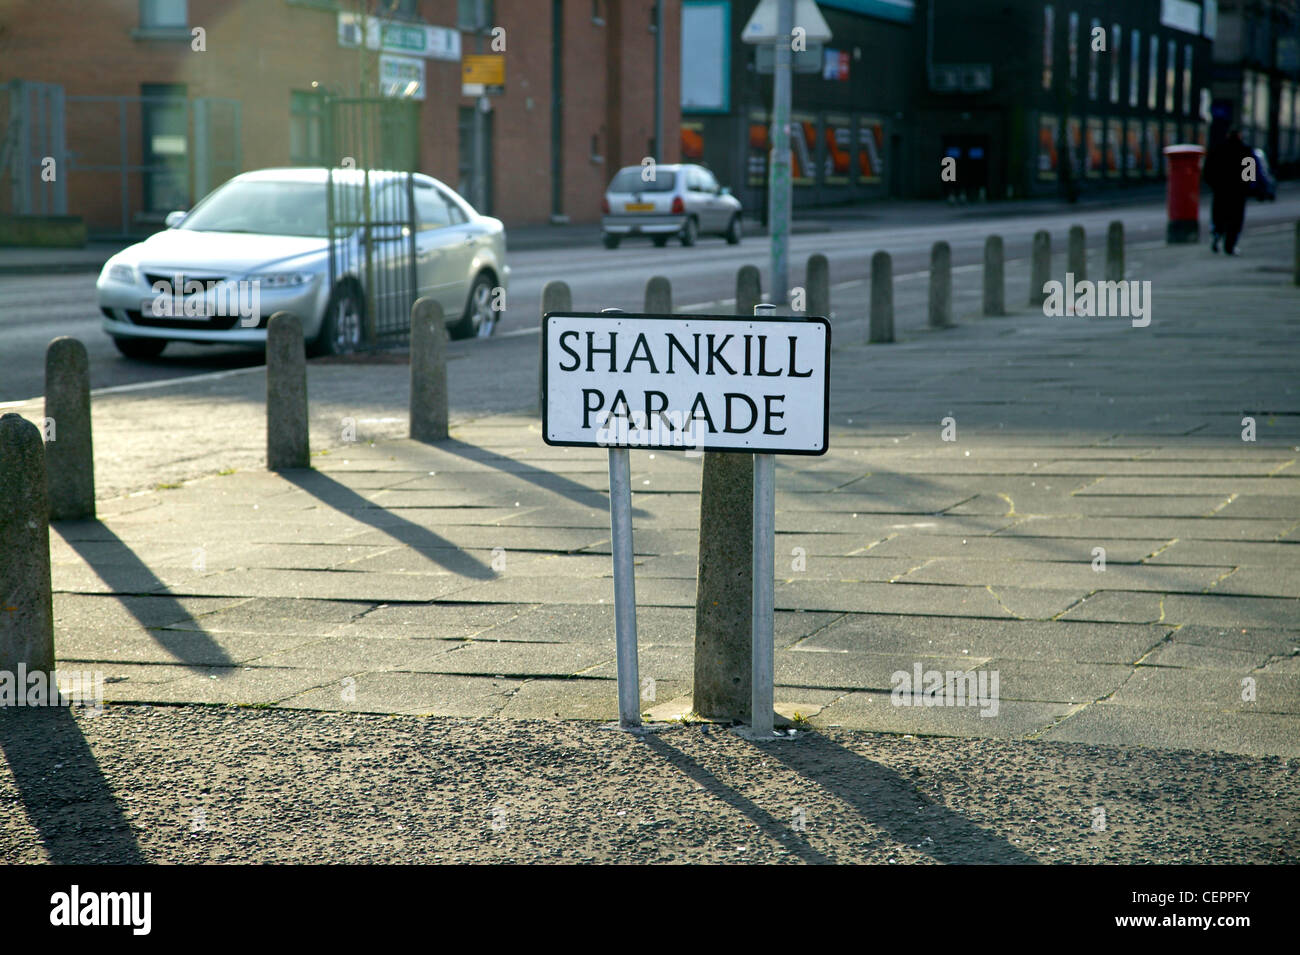 A close up of the Shankill Parade street sign in Belfast. Stock Photo